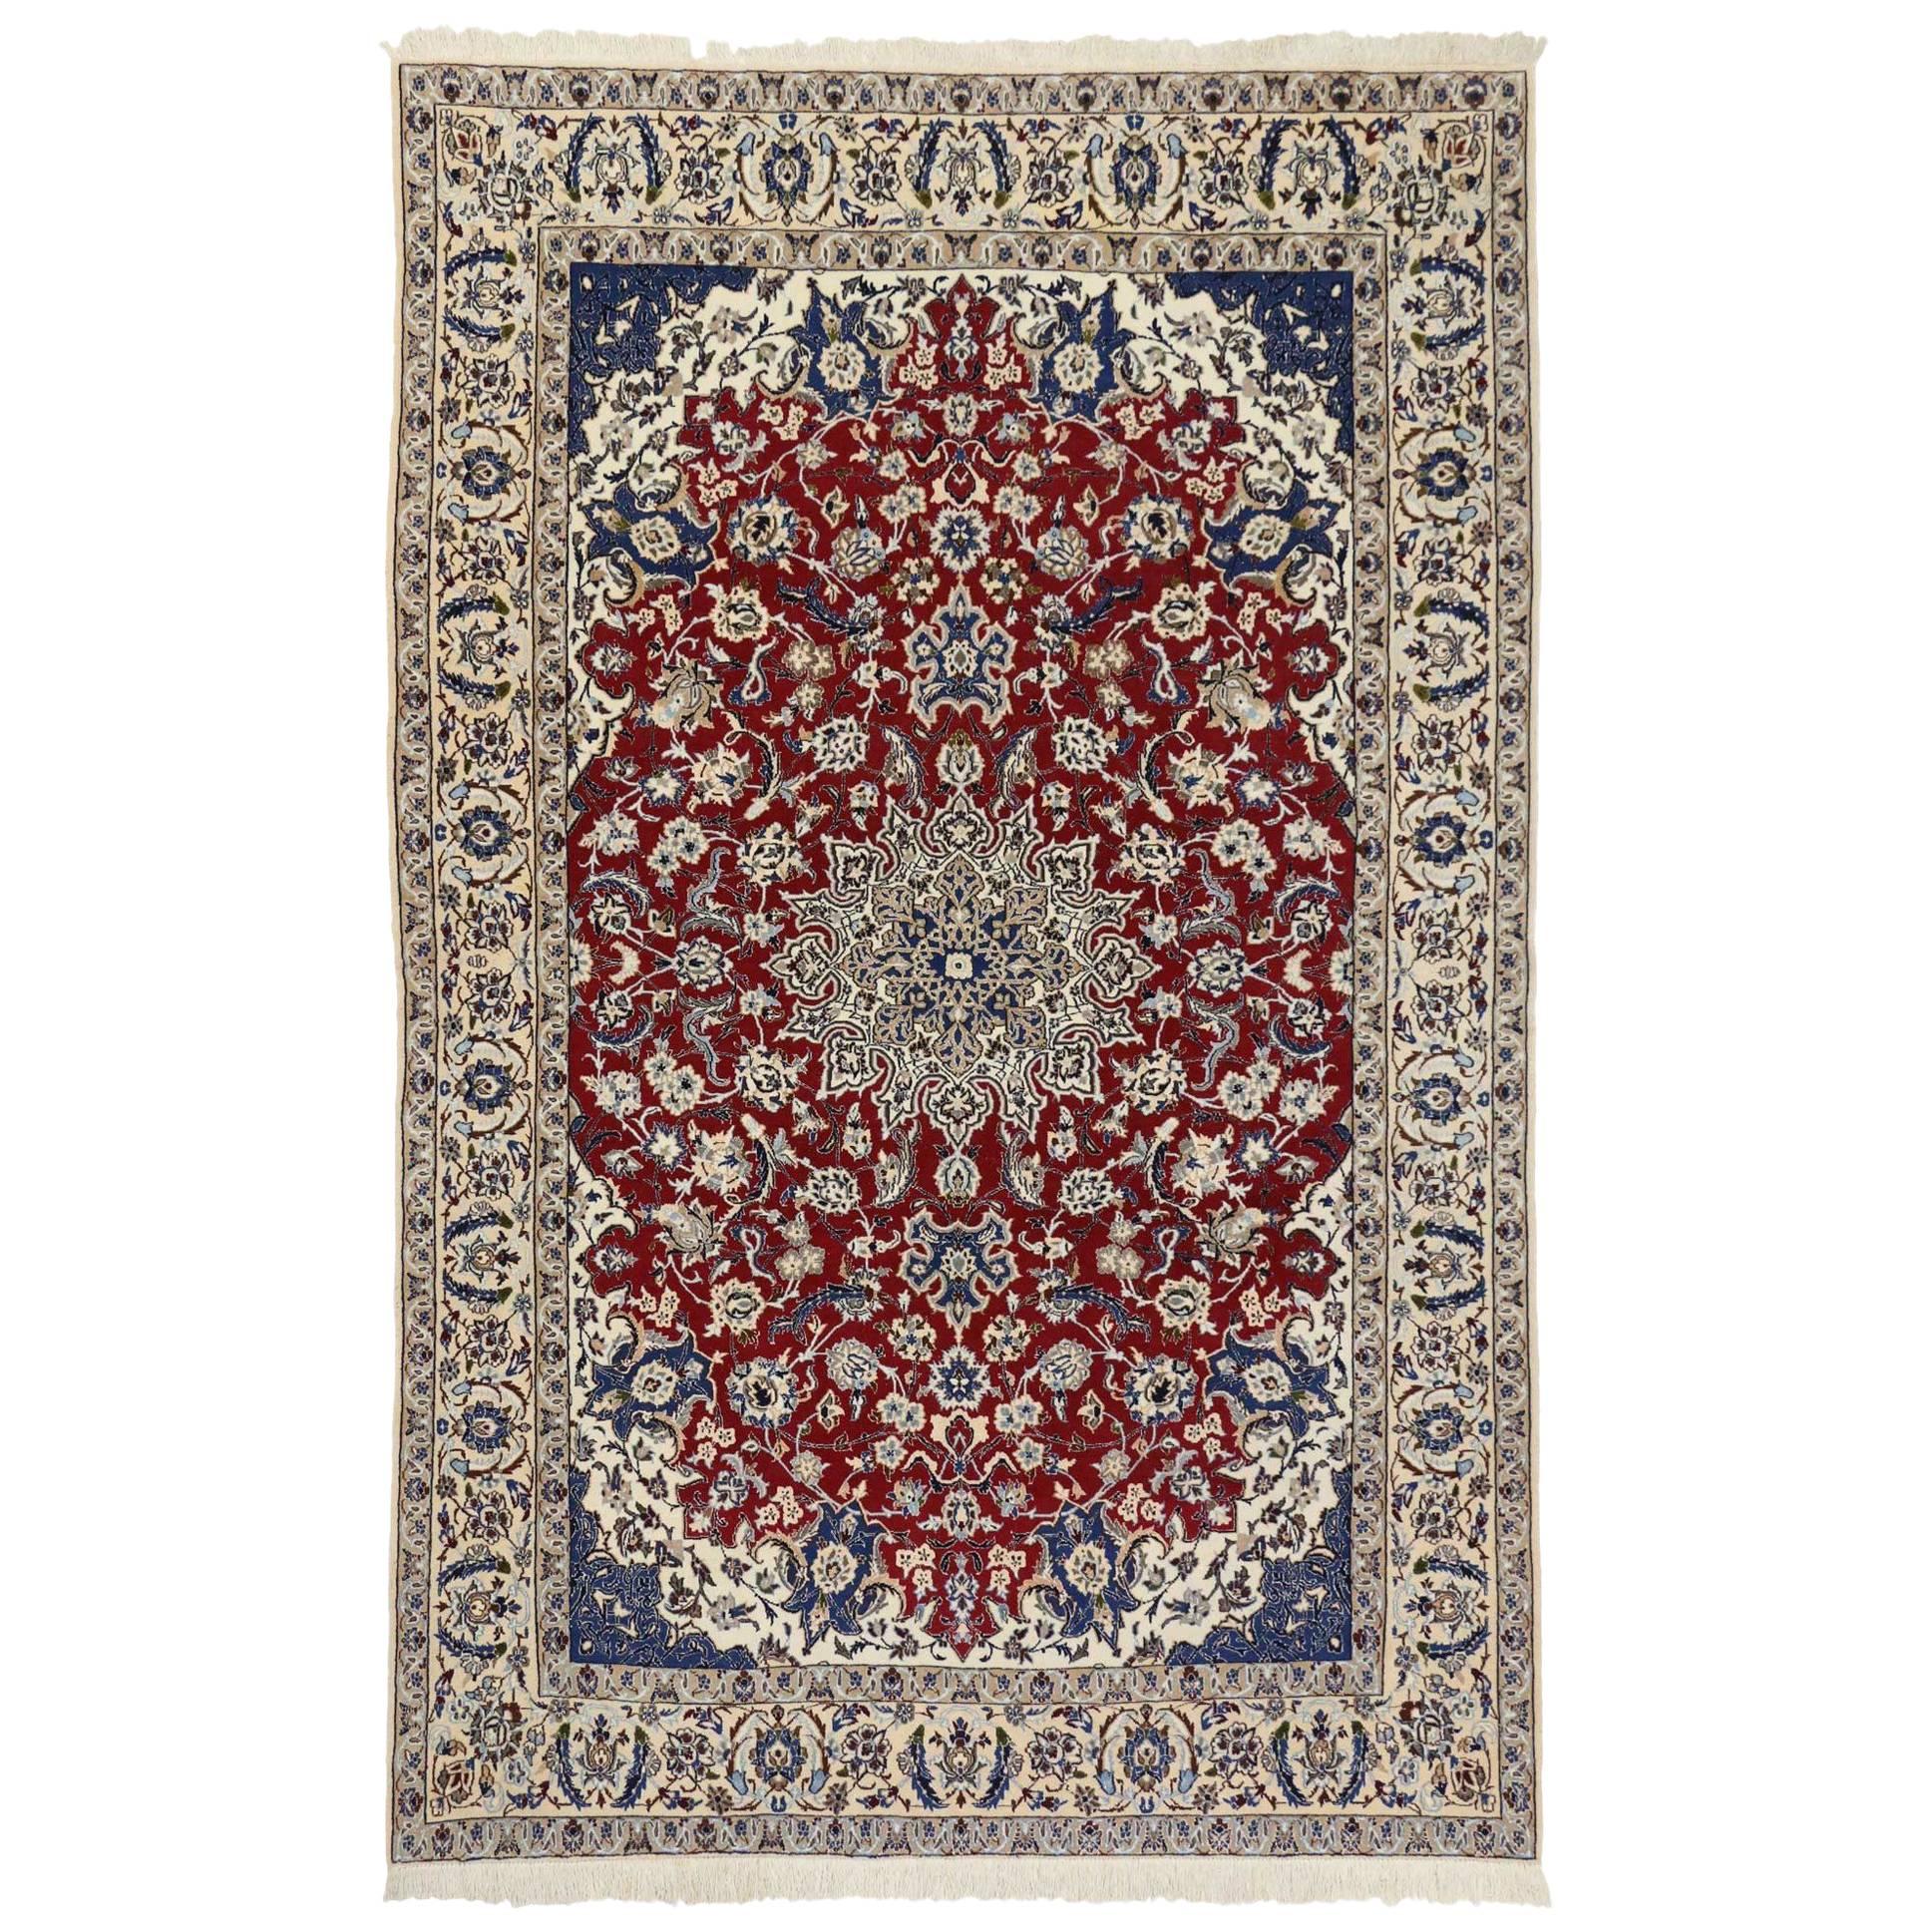 Vintage Persian Nain Rug with Federal Colonial Style